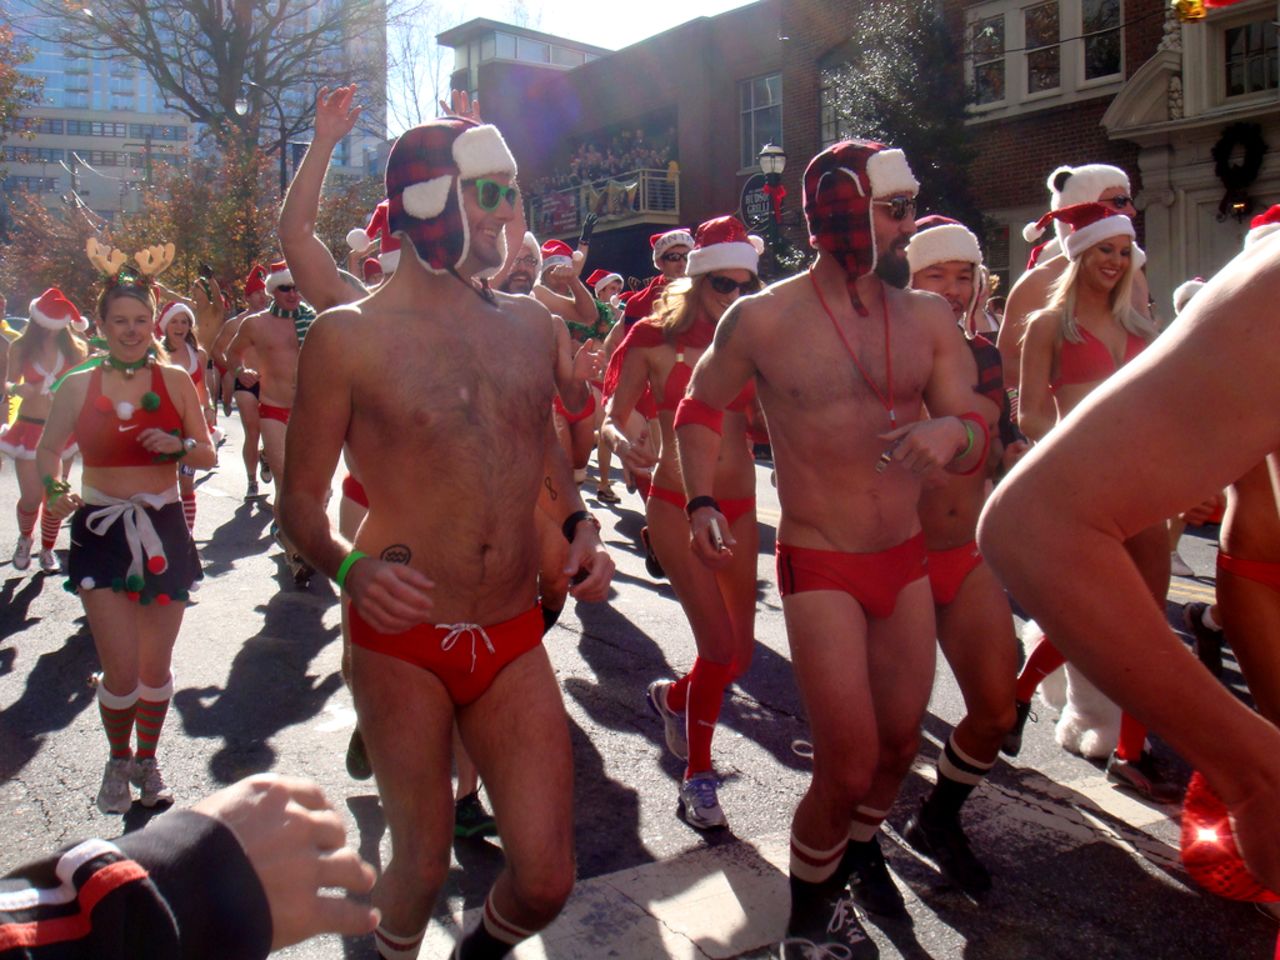 If you think you'll need more time to train, sign up for Atlanta's annual <a href="http://www.atlantasantaspeedorun.org/" target="_blank" target="_blank">Santa Speedo Run</a> in December. Participants don red speedos (or bikinis) and Santa hats to traverse the 1.5 mile course. Sure it's a bit chilly, but it's worth it to raise money for a worthwhile charity. 